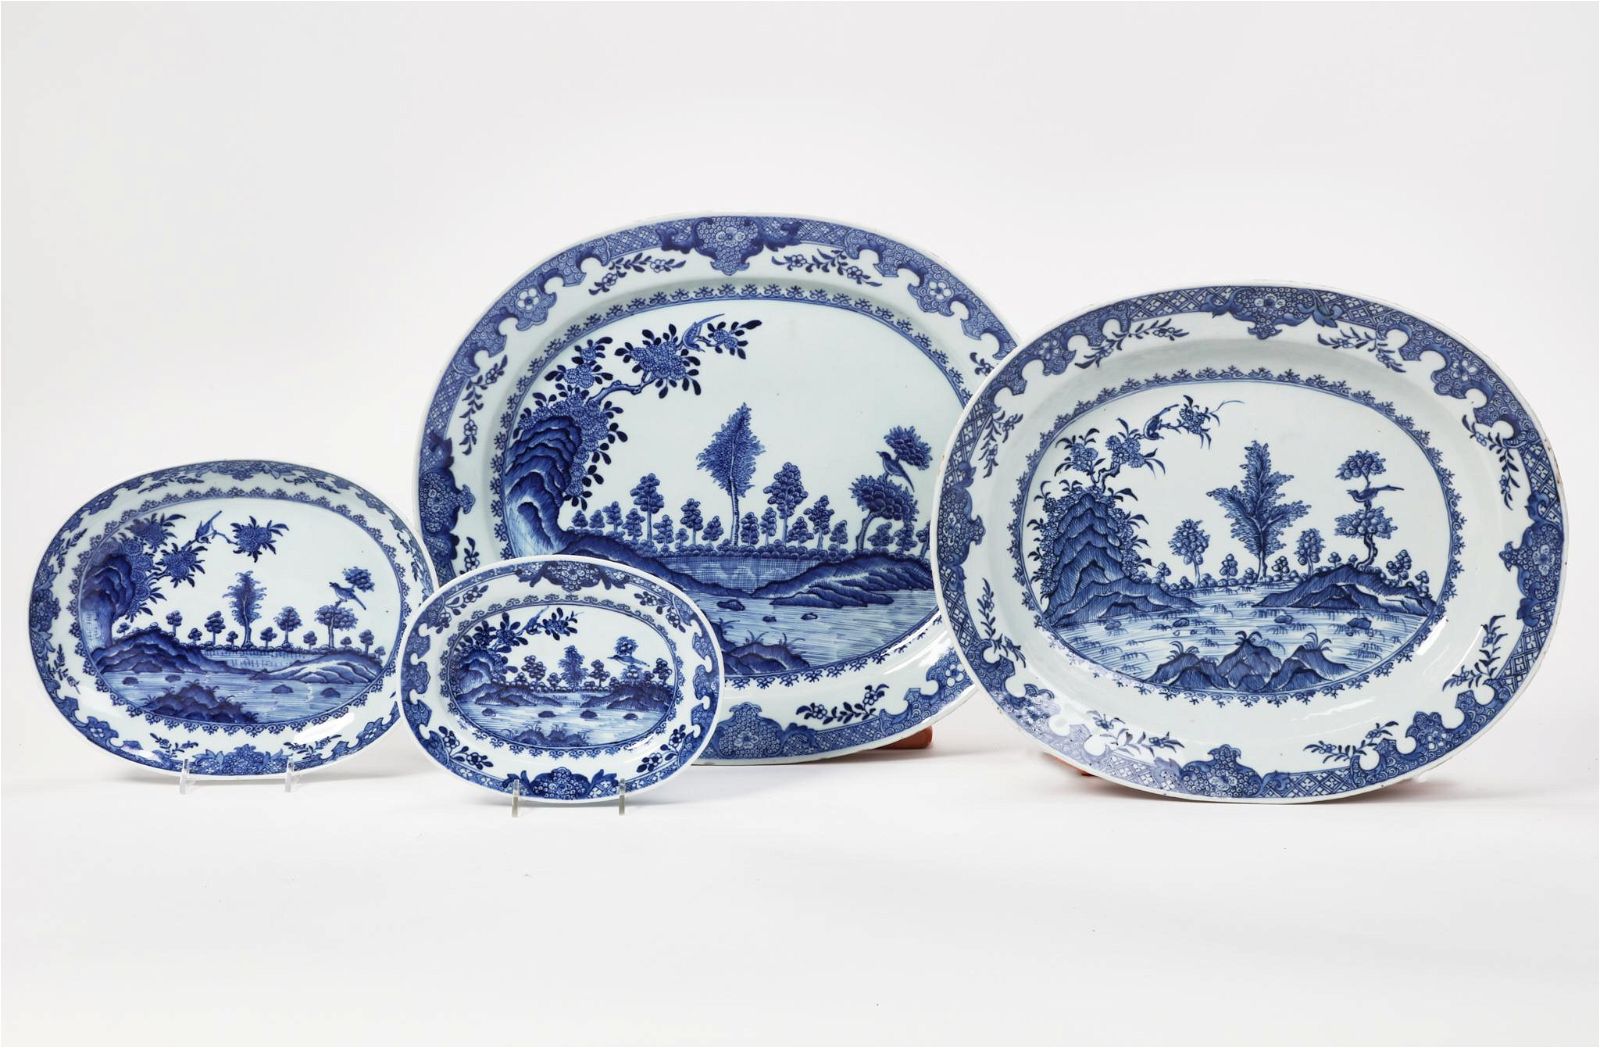 4 CHINESE EXPORT PORCELAIN BLUE